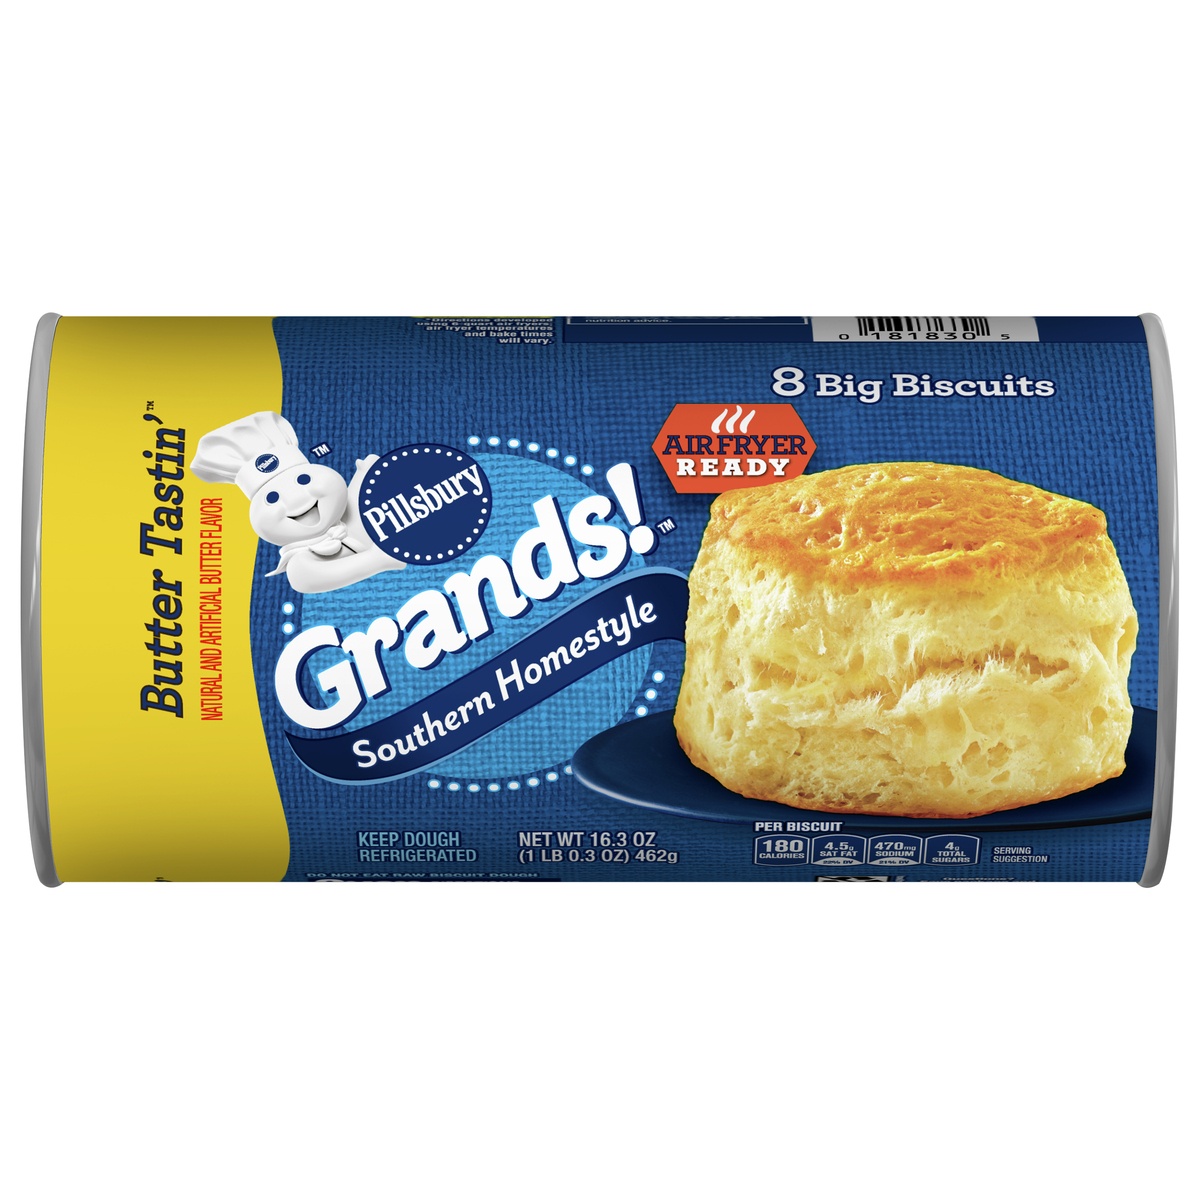 slide 1 of 1, Pillsbury Grands! Southern Homestyle Butter Tastin' Biscuits, 8 ct., 16.3 oz., 8 ct